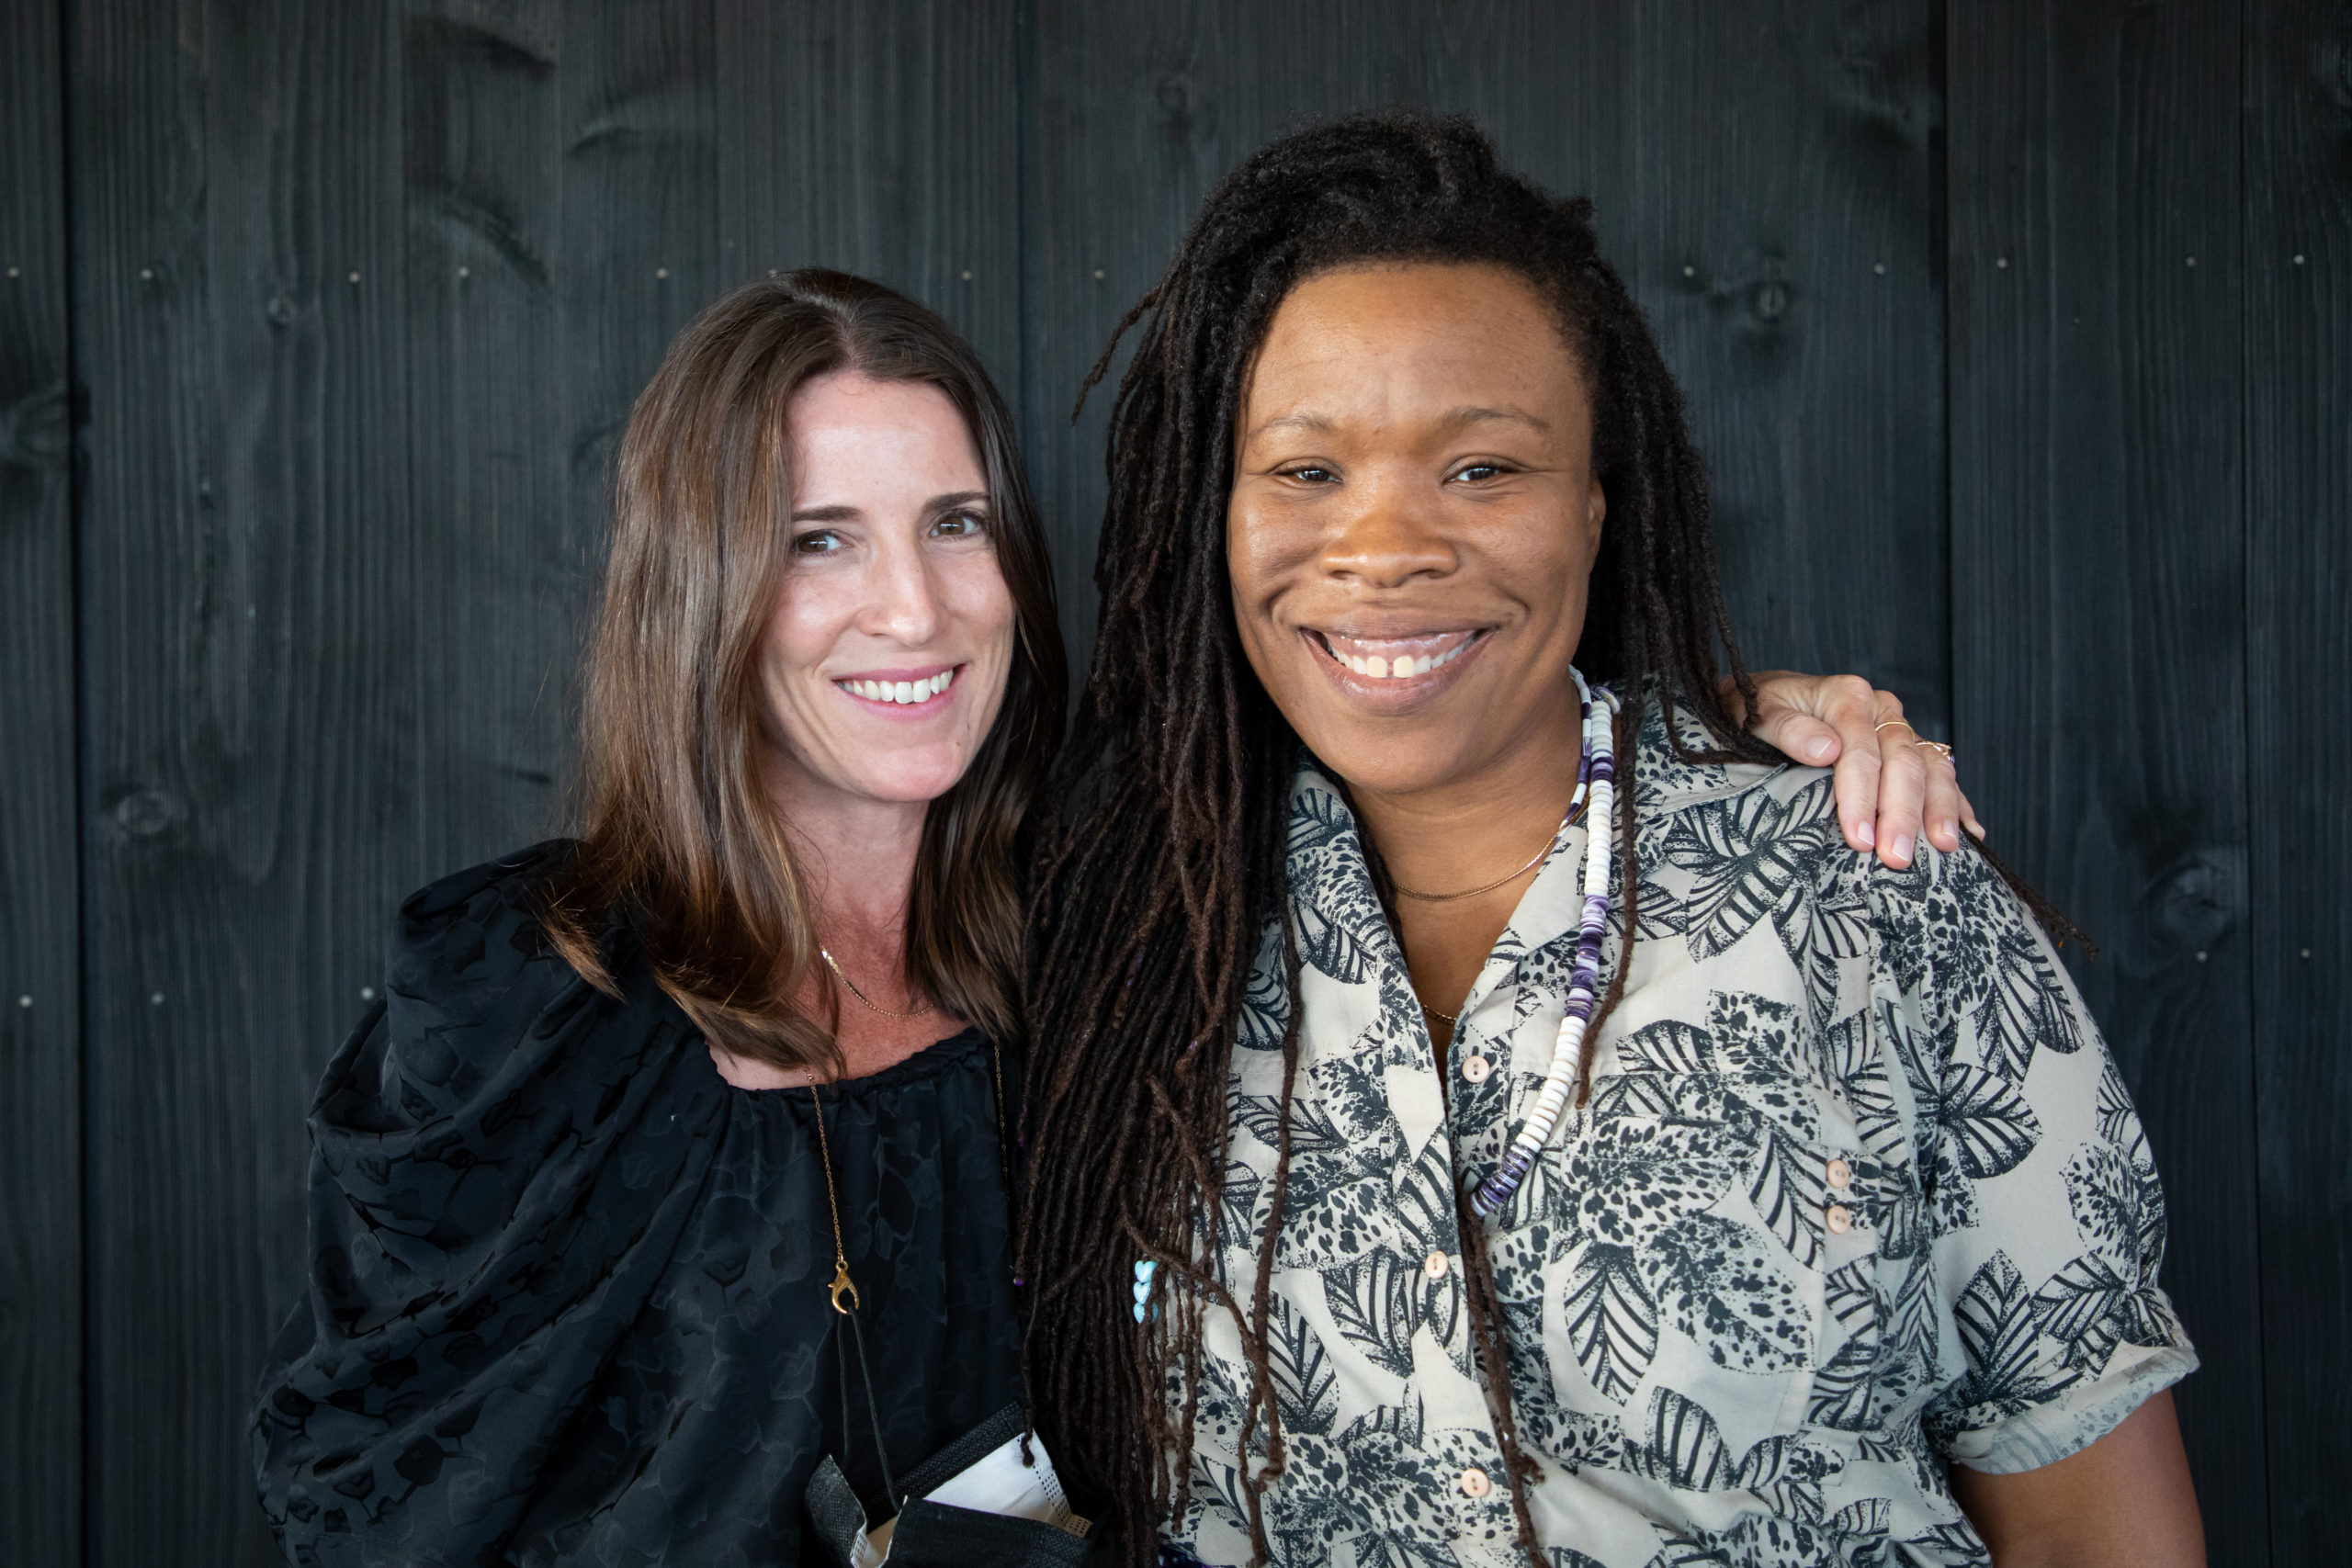 Parrish Art Museum director Kelly Taxter, left, with artist Tomashi Jackson.